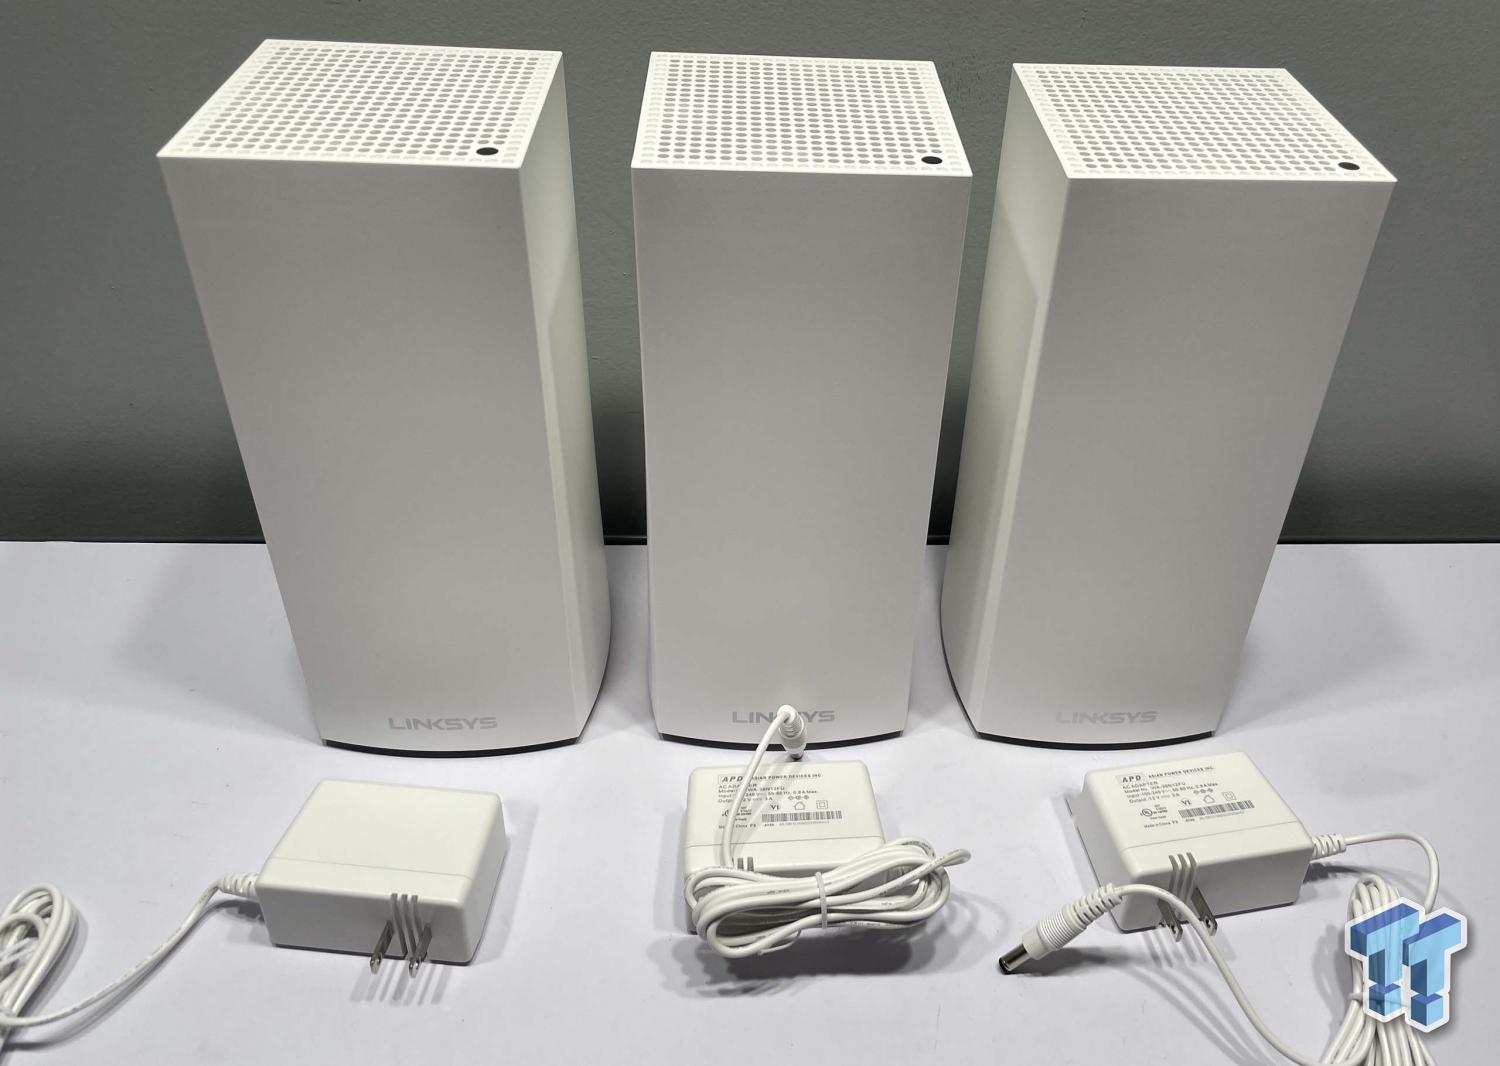 Linksys Velop AX4200 Wi-Fi 6 Whole Home Mesh System Review